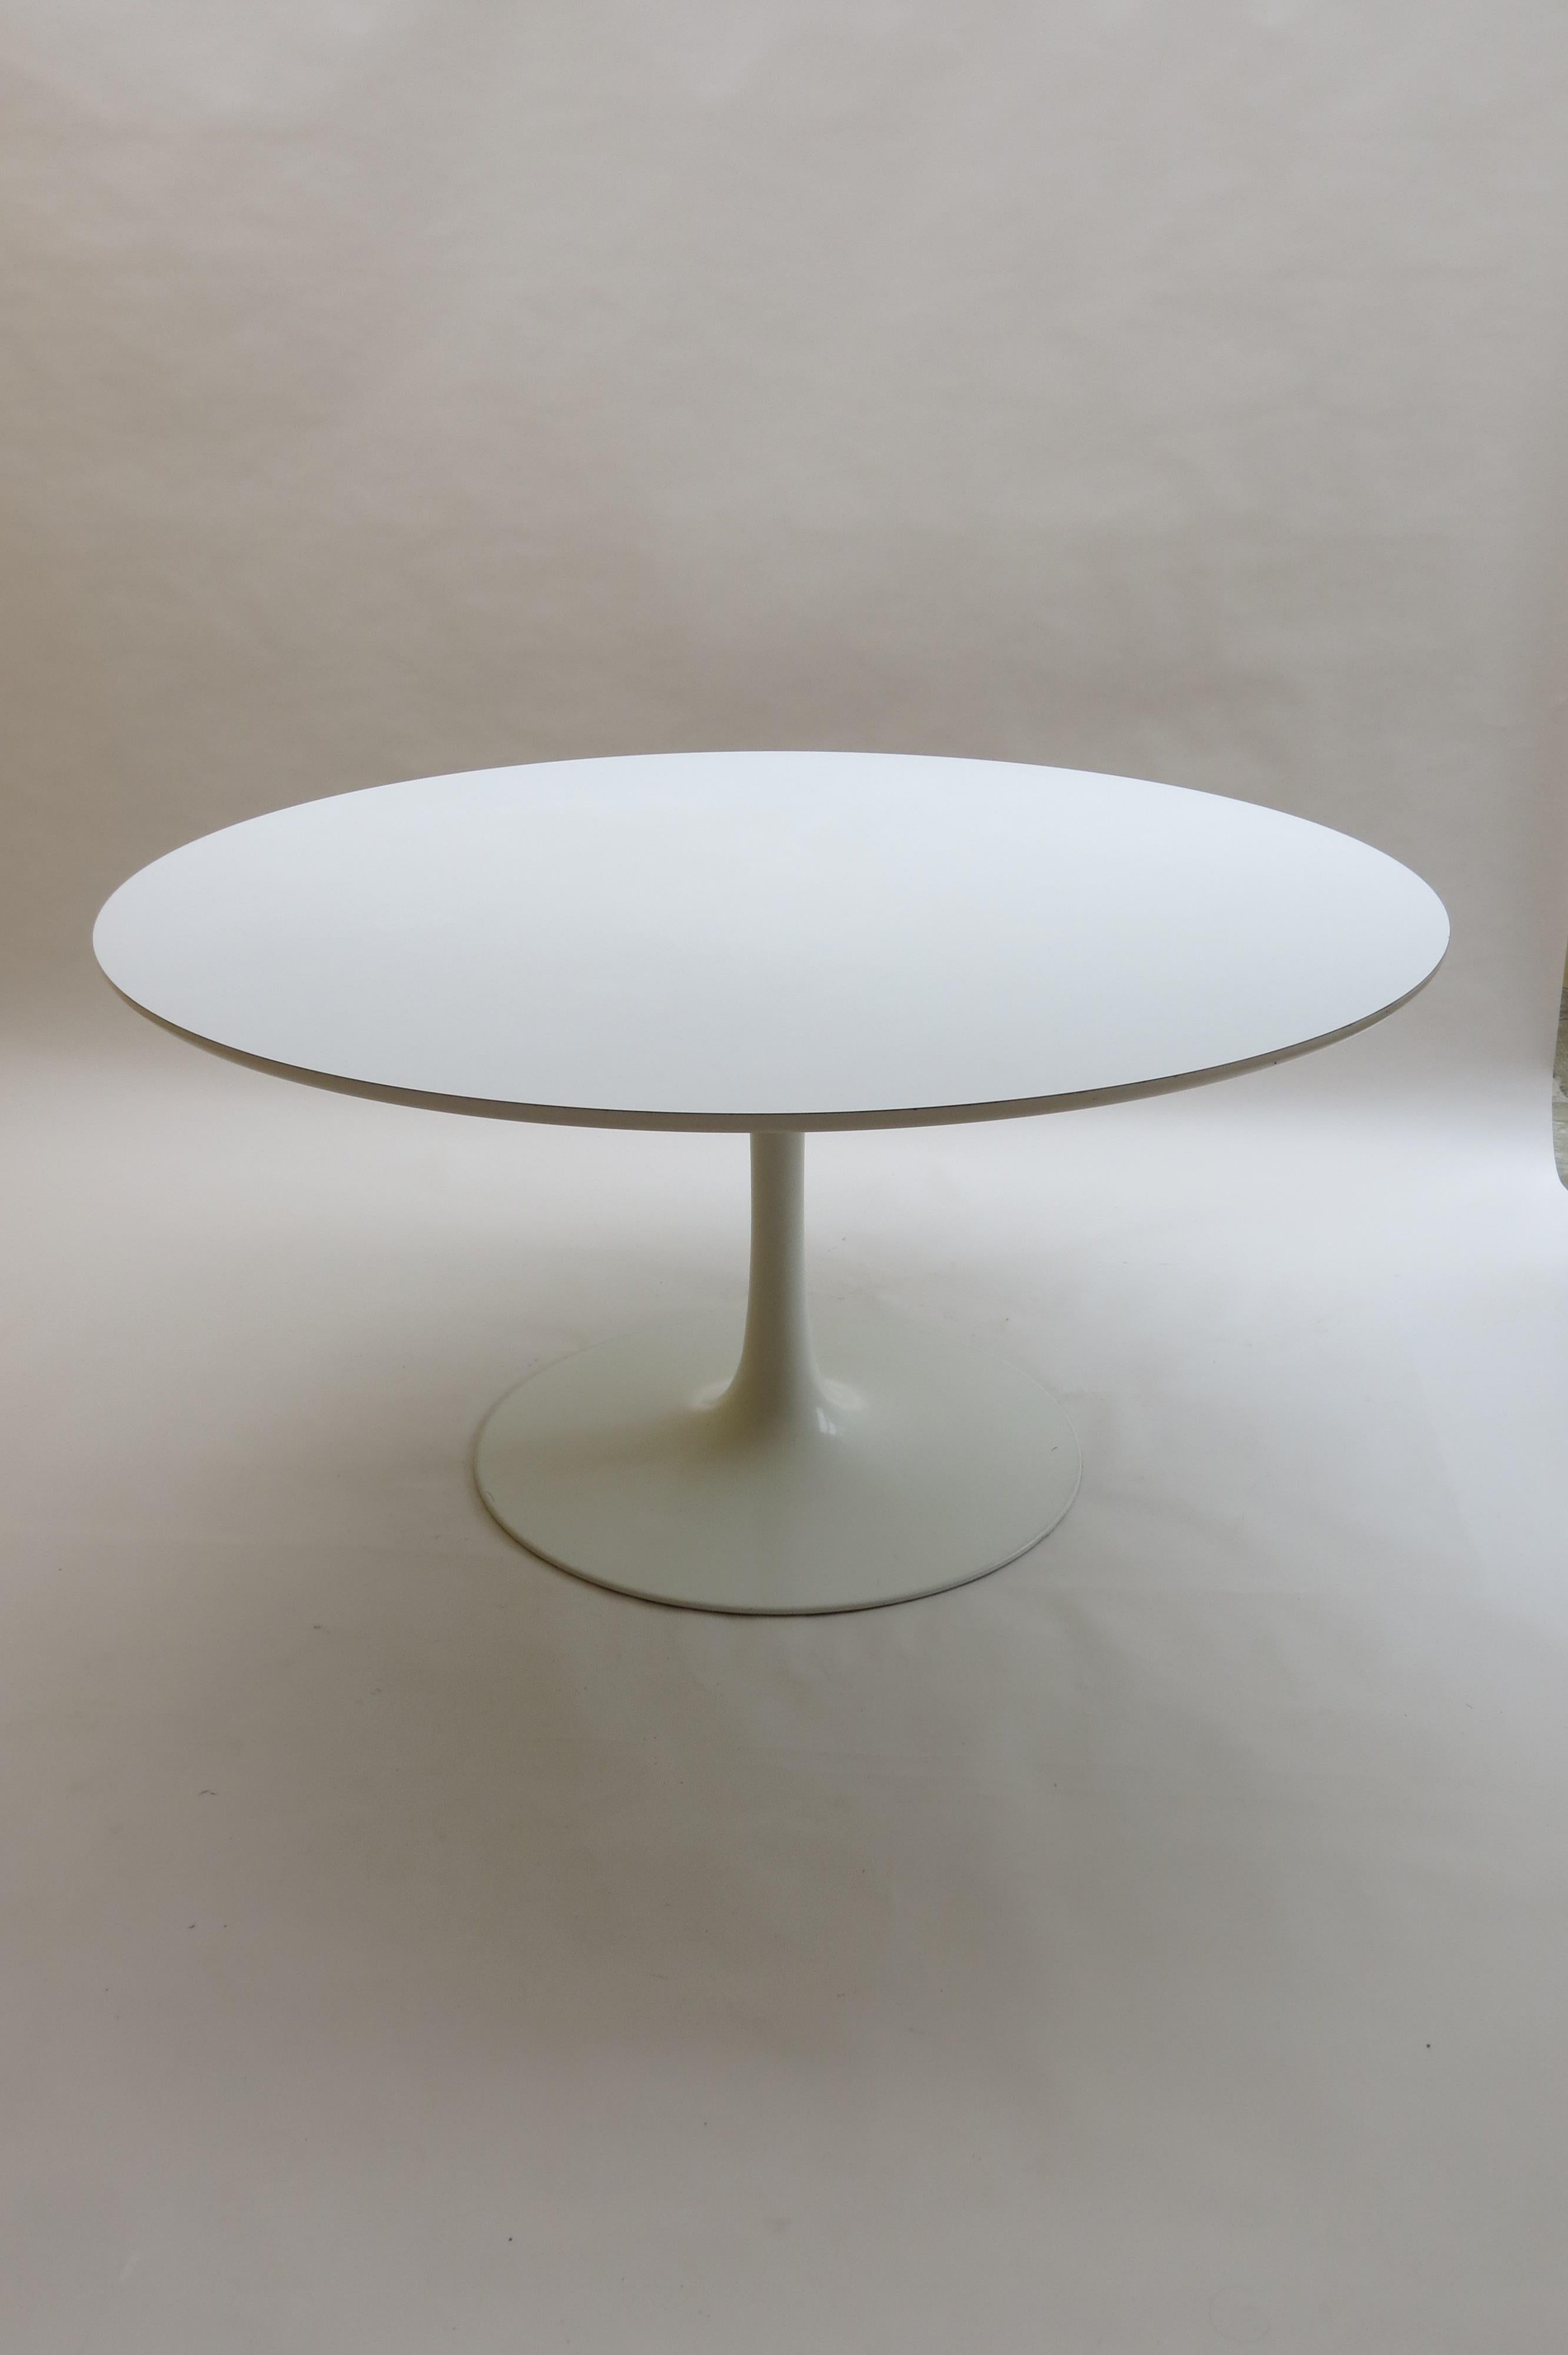 1960s Tulip Dining Table designed by Maurice Burke for Arkana, Bath, UK.

Cast aluminium base and circular laminate top.

In very good condition, minimal signs of use.

Sits 6 people.

Stamped to underside of base.

st15251250